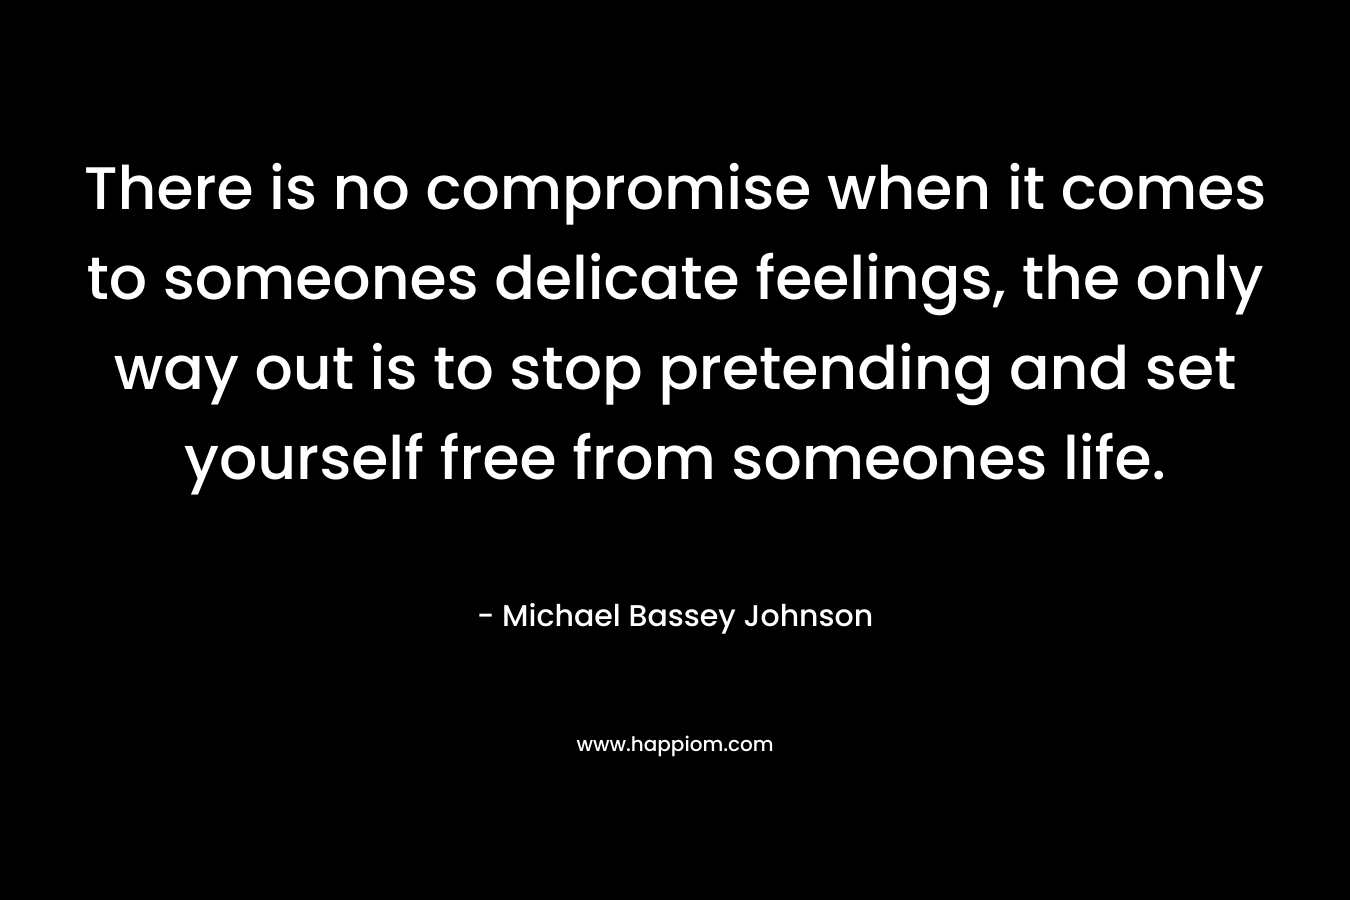 There is no compromise when it comes to someones delicate feelings, the only way out is to stop pretending and set yourself free from someones life.